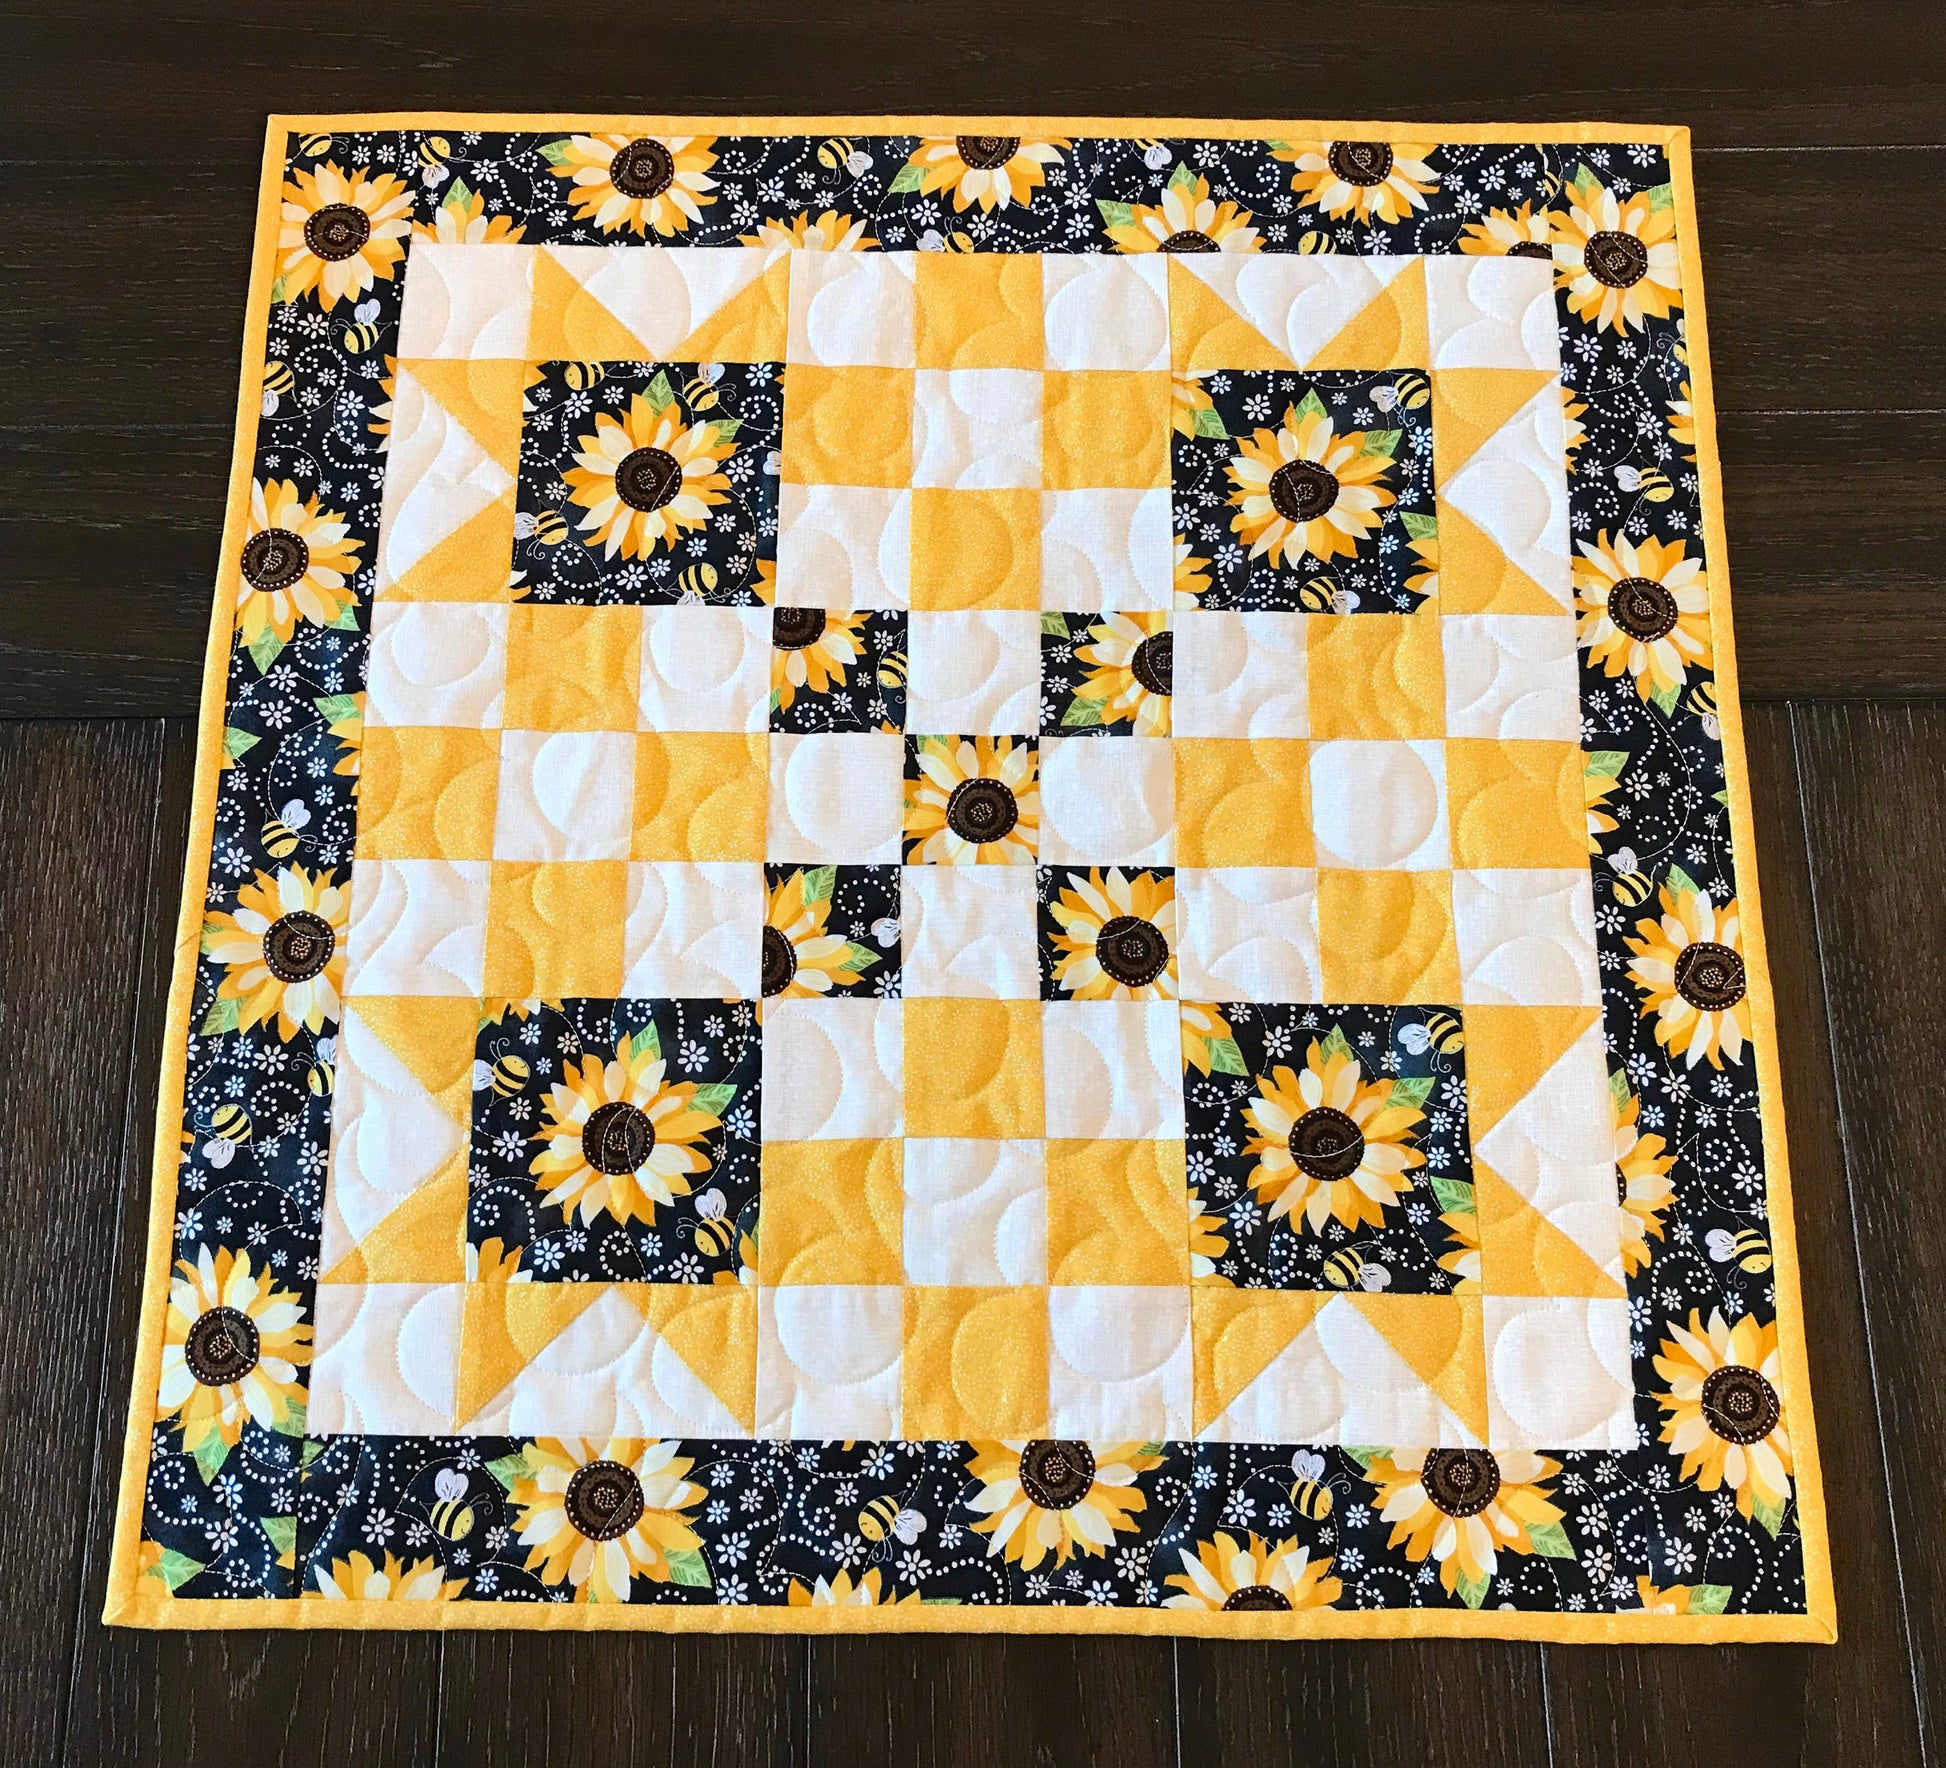 square topper displayed on a tale for pattern for a table runner or table topper that has sawtooth star corner units with nine patch blocks in between.